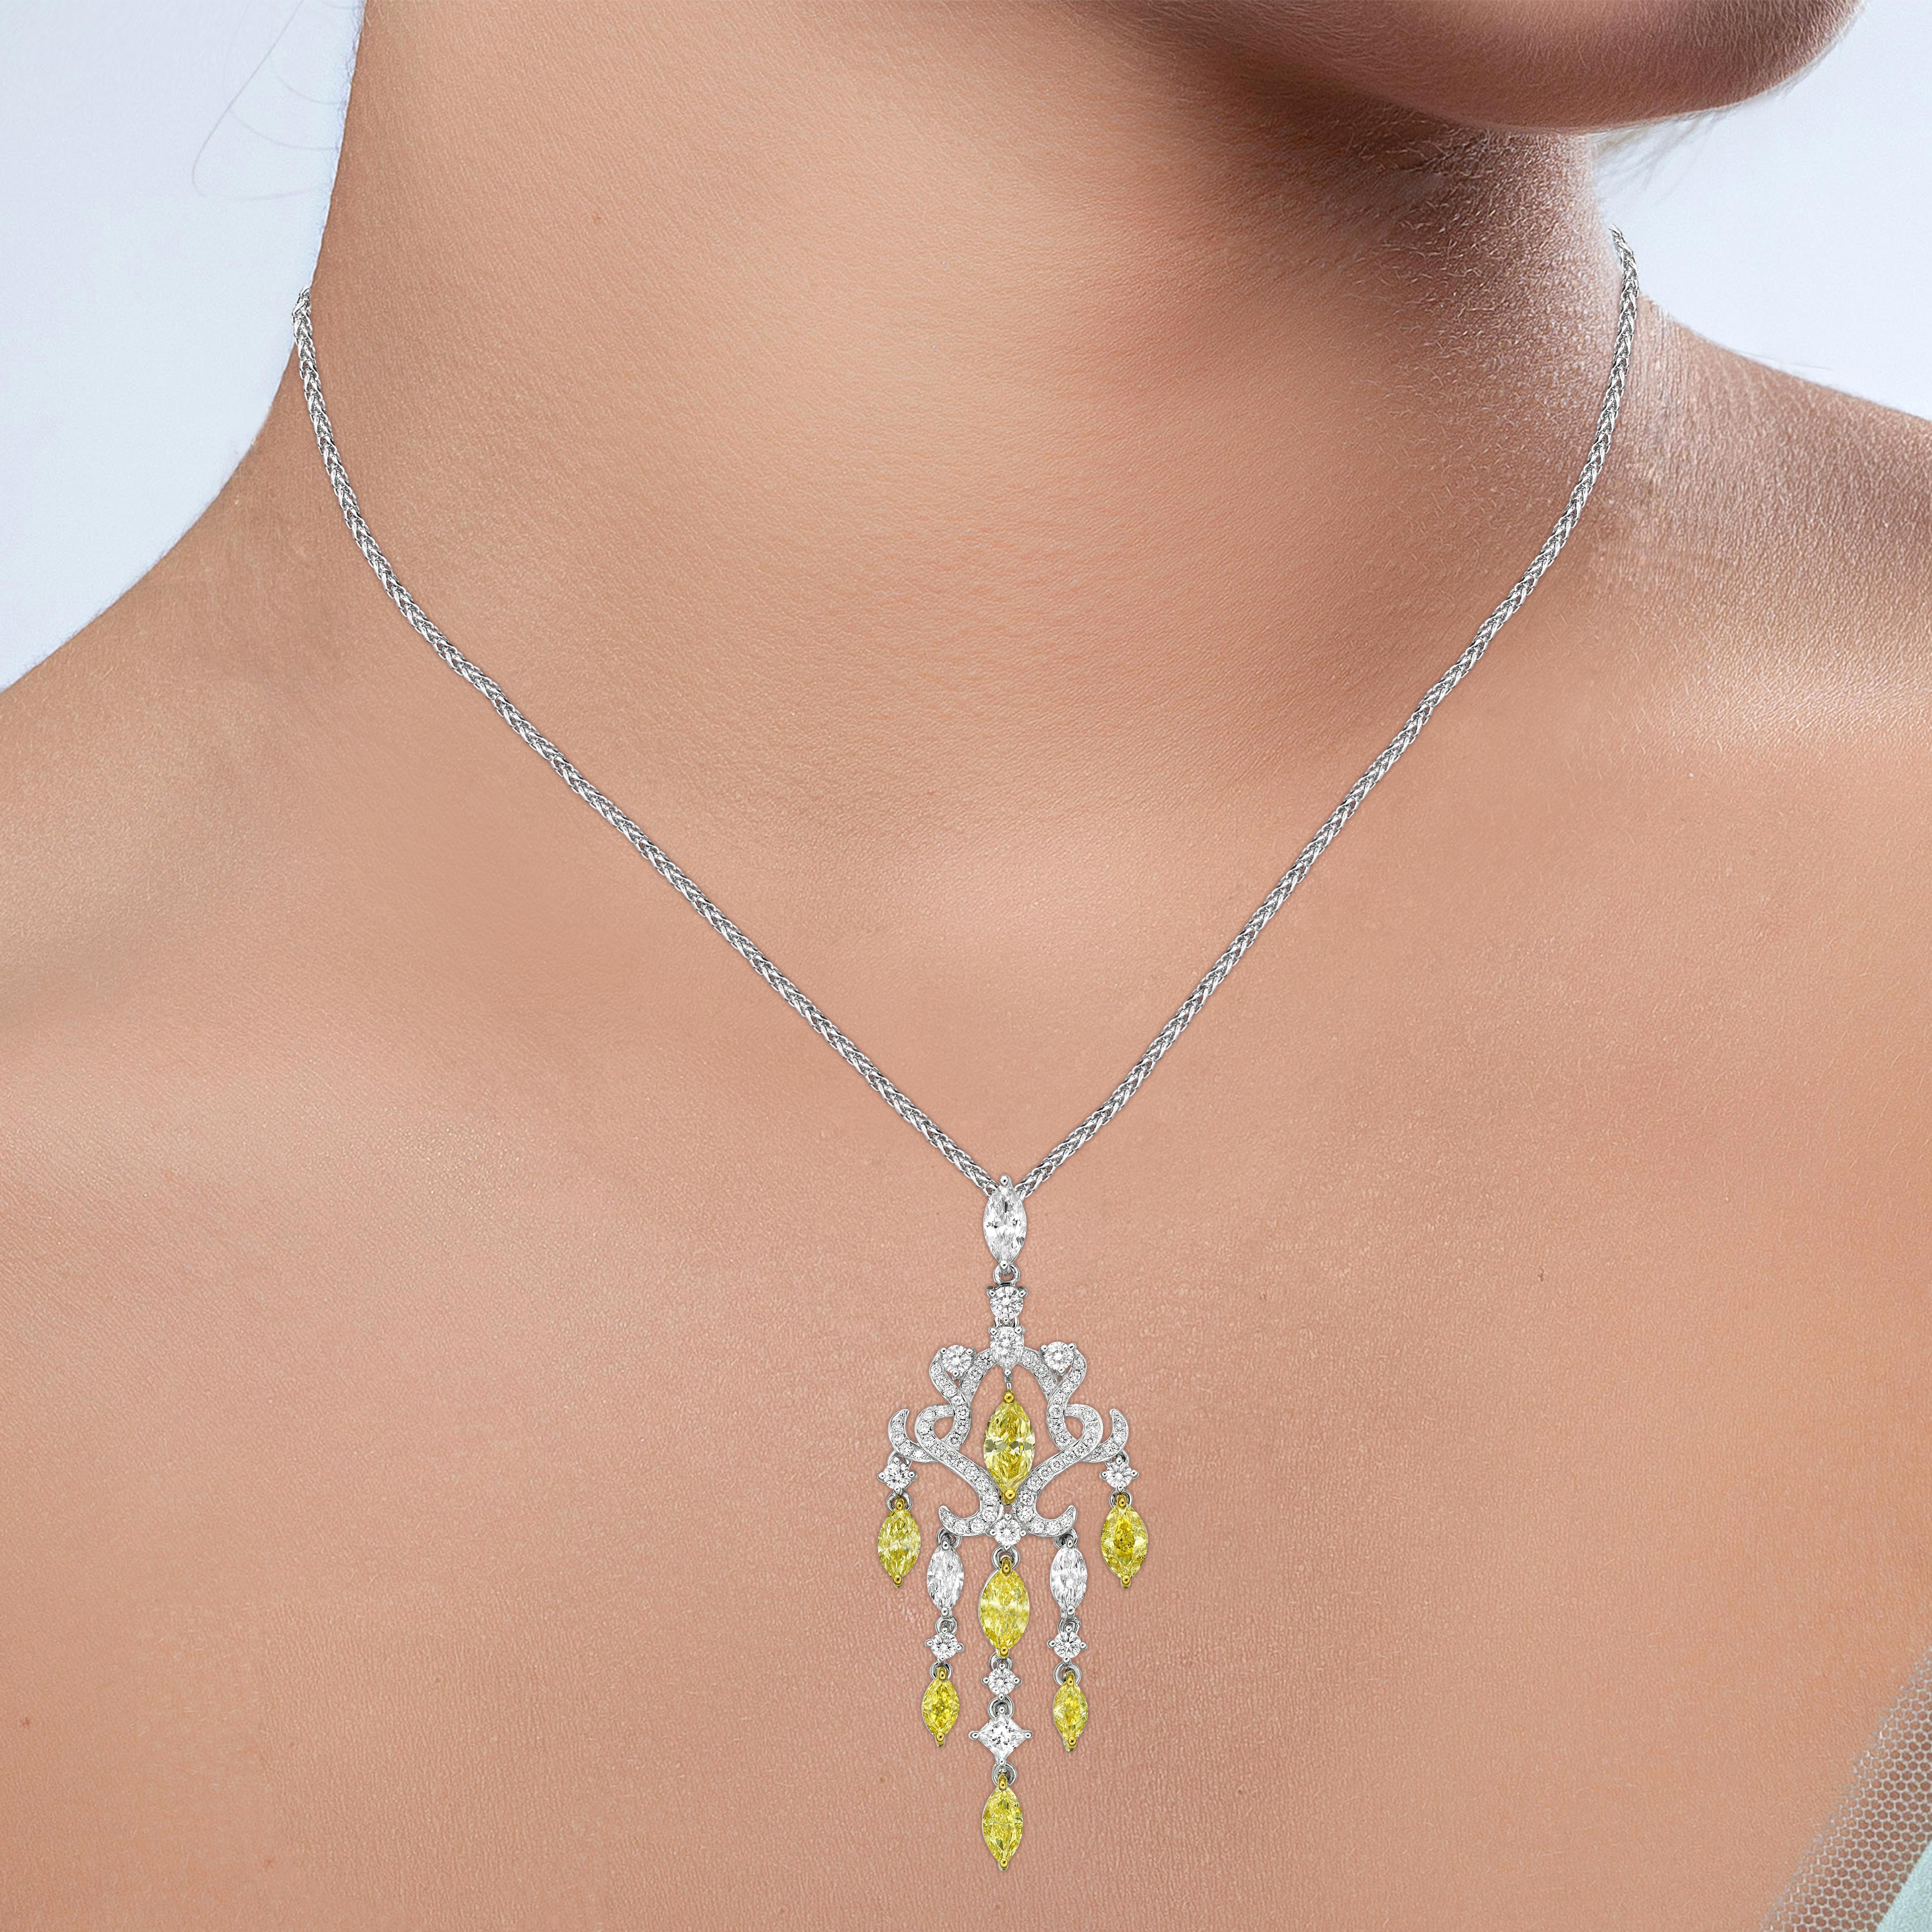 These fascinating Pendant is made in luxurious 18K white gold, featuring Yellow and White Diamonds in Marquise cut in Chandelier design.  Very elegant design.

Yellow and White diamonds give a big contrast on the pieces. 

The white diamonds used in